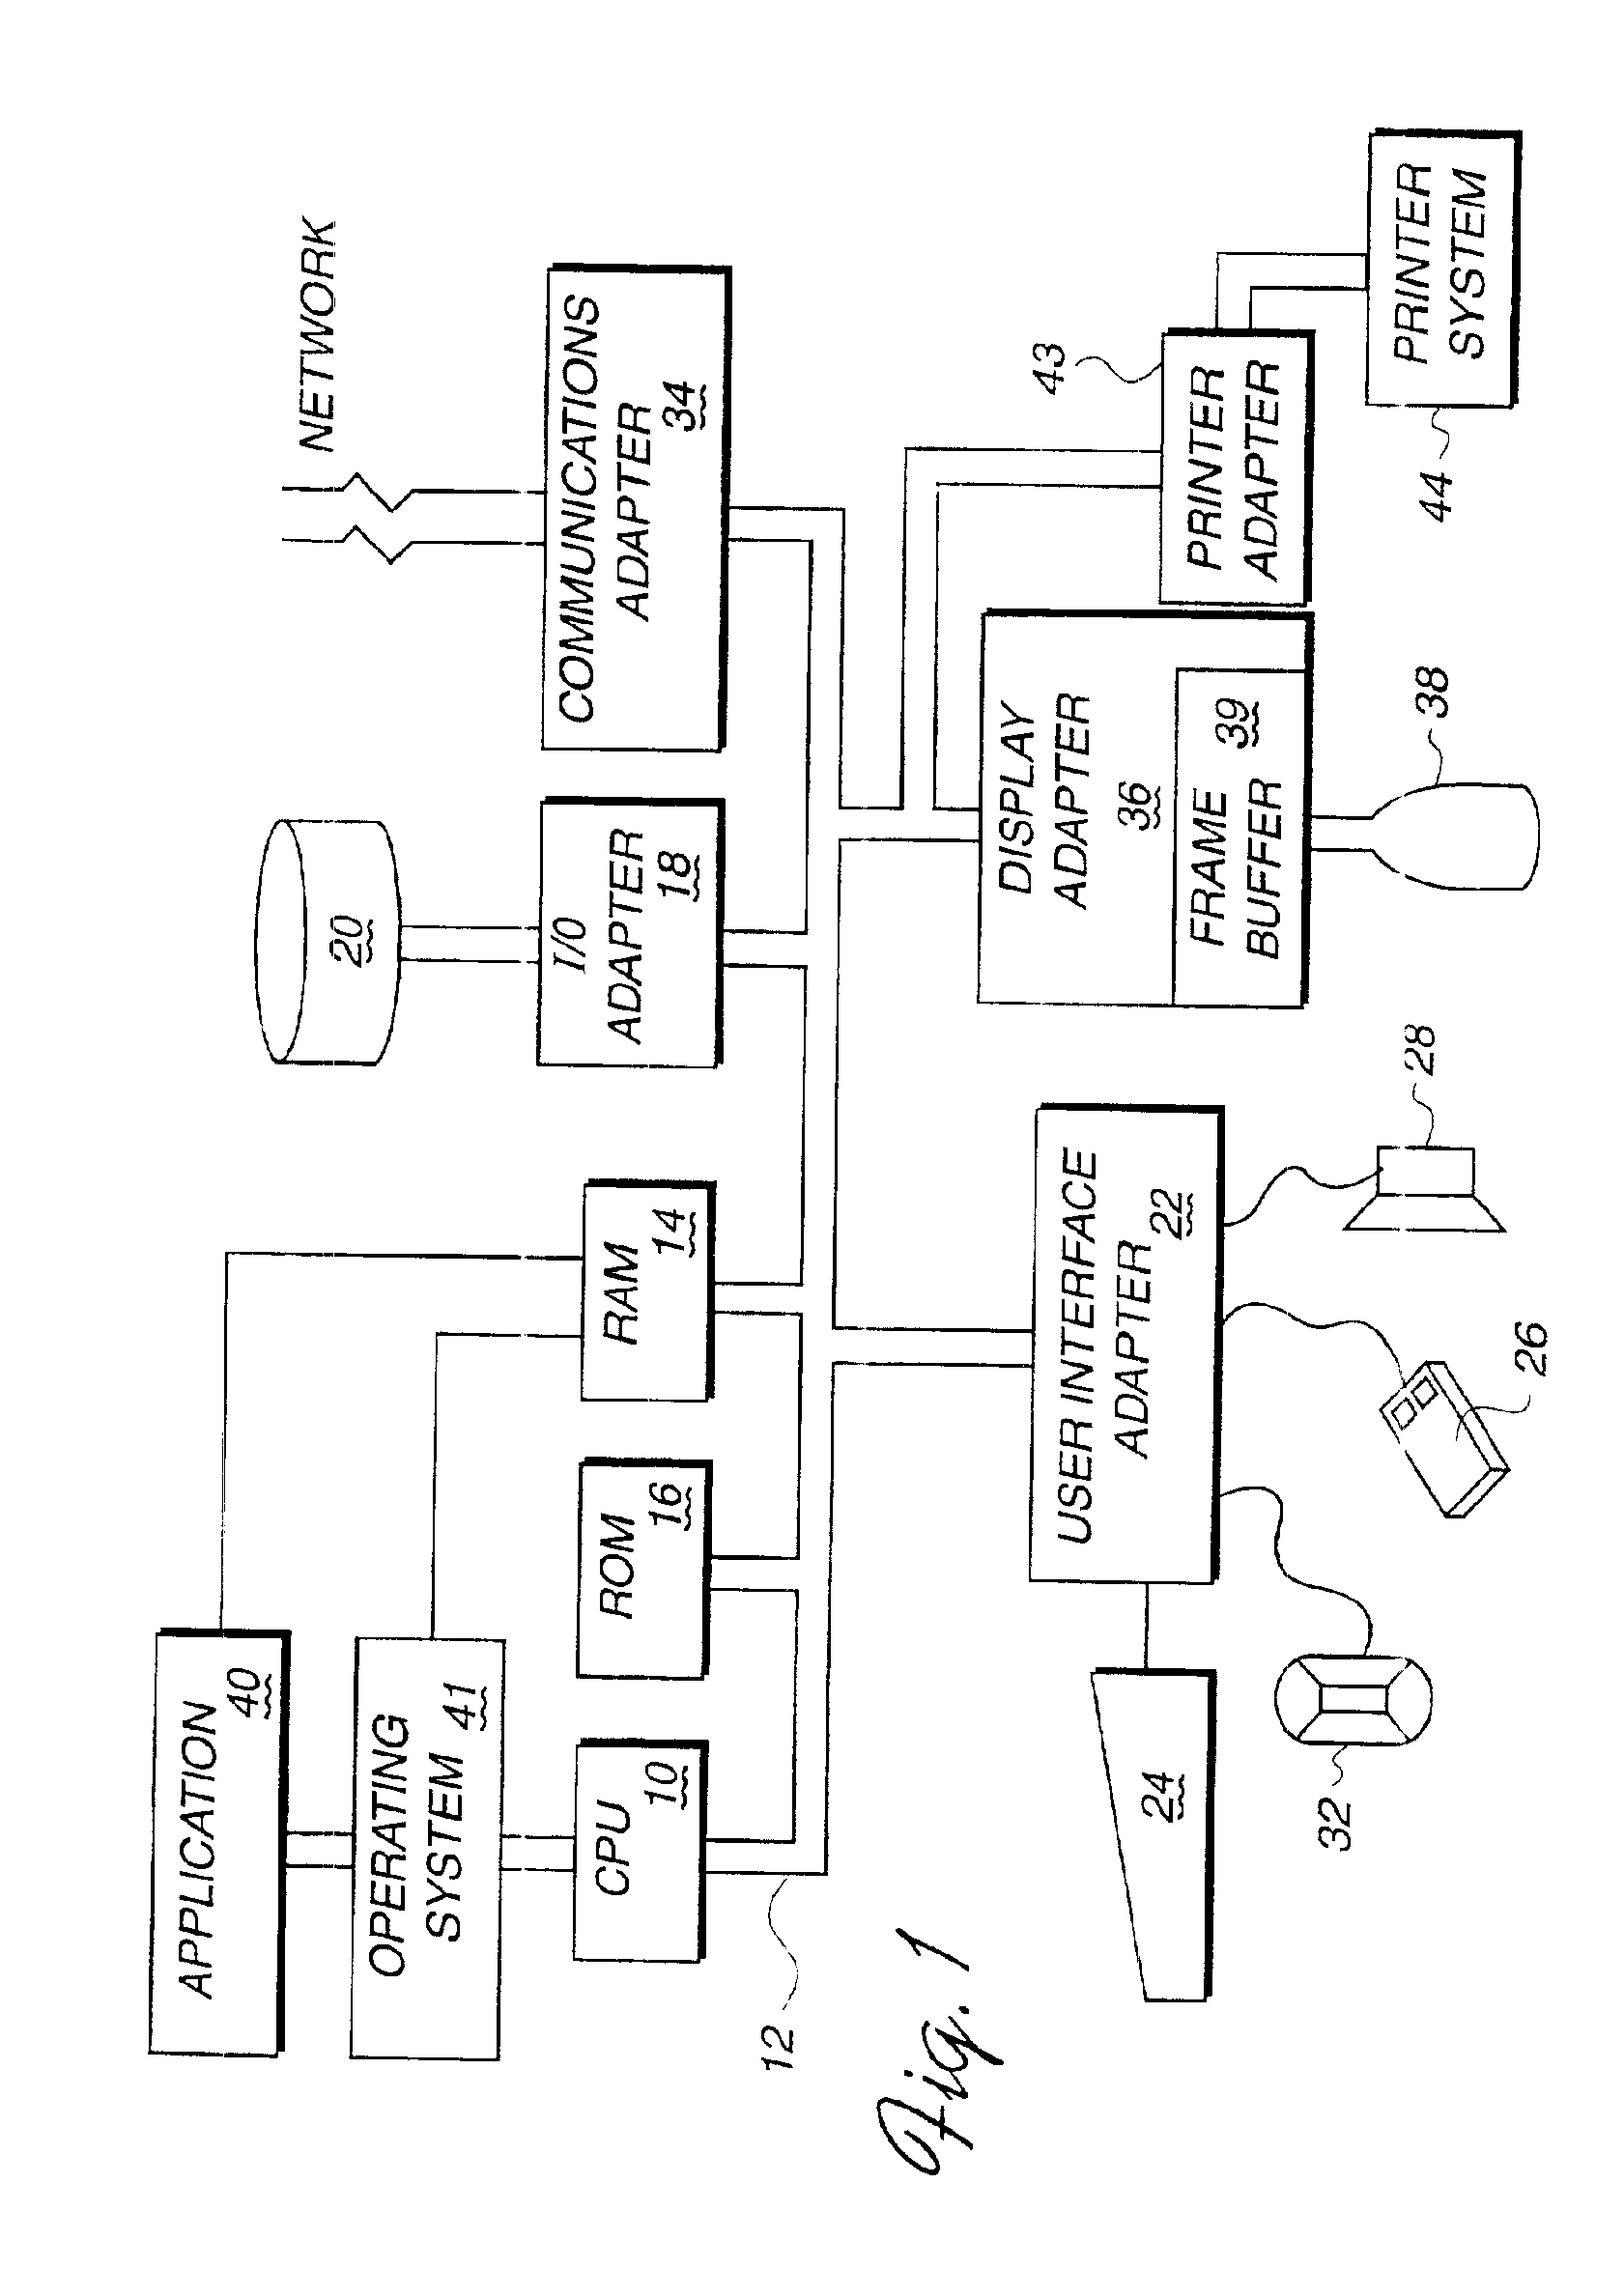 Method, system, and program for selecting devices to use to execute selected tasks in a graphical user interface